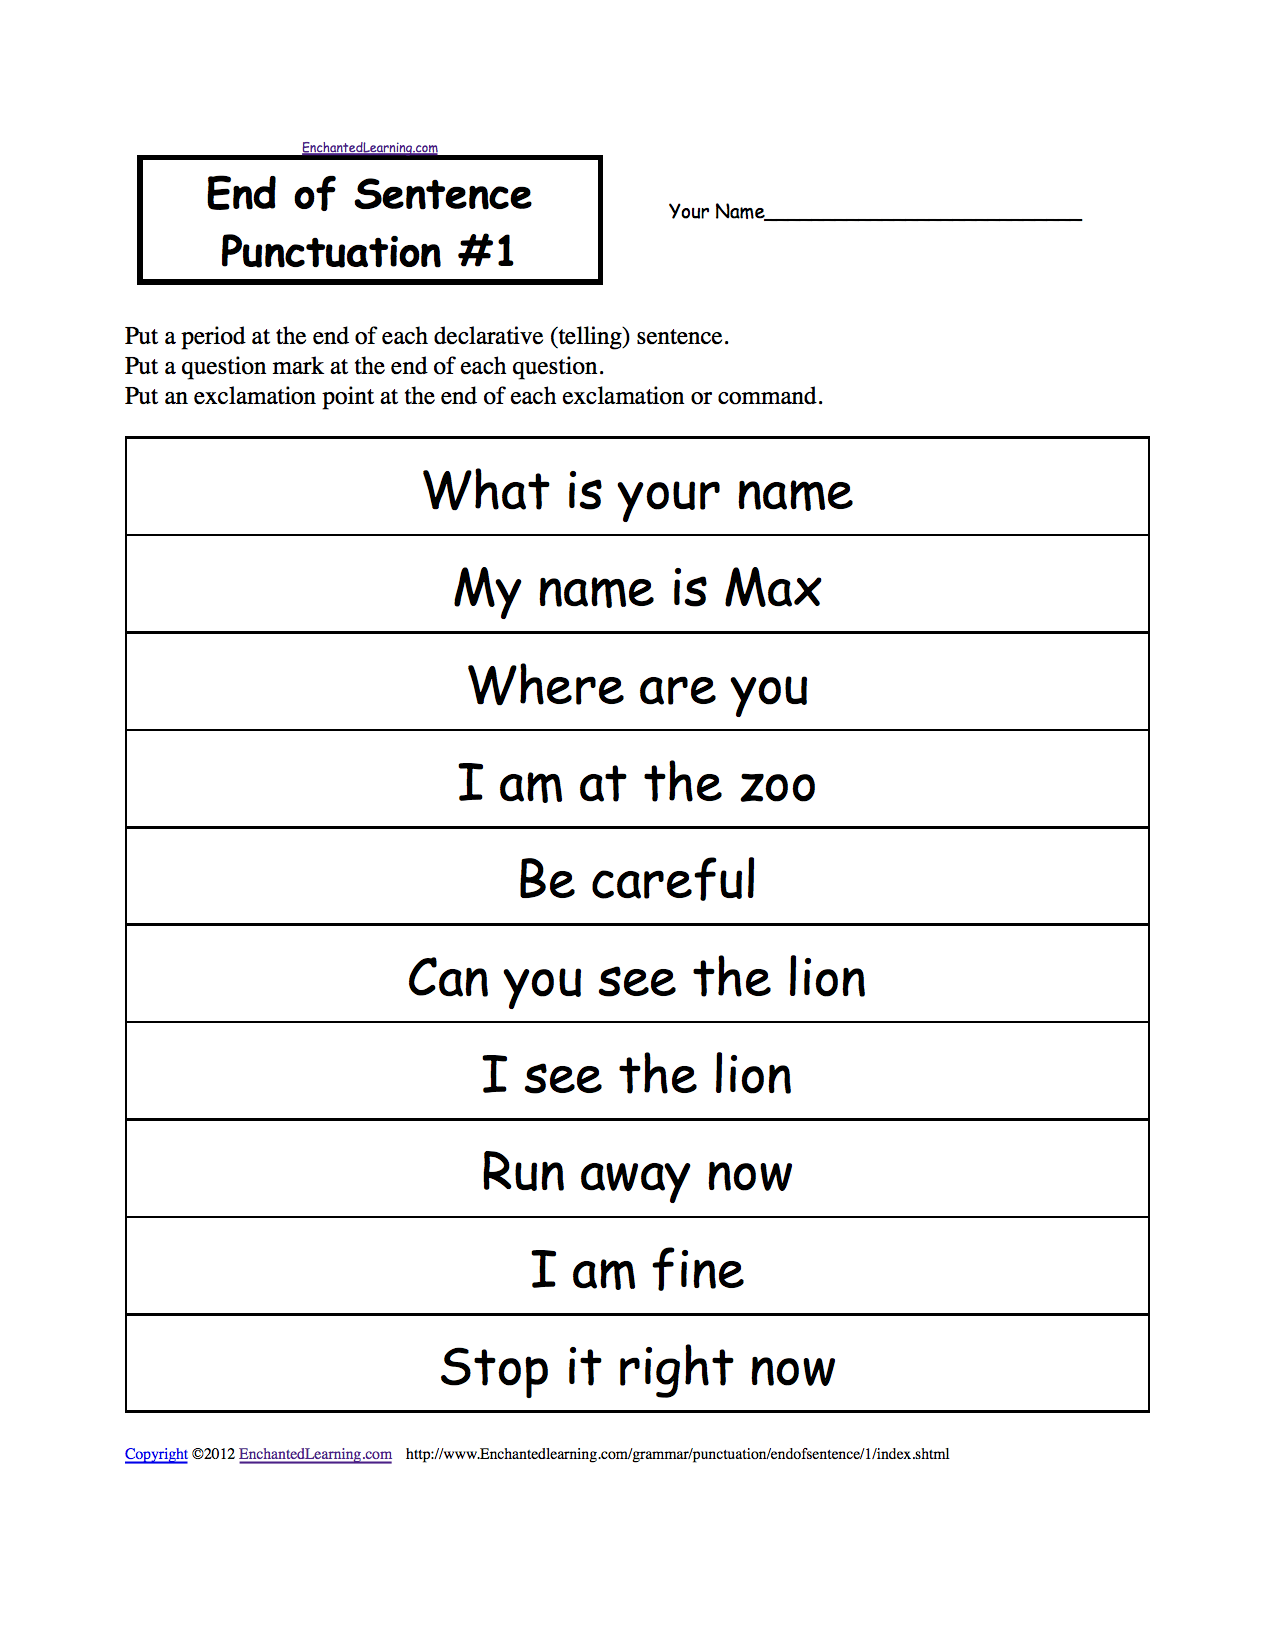 Simple Punctuation Exercises With Answers Pdf ExerciseWalls